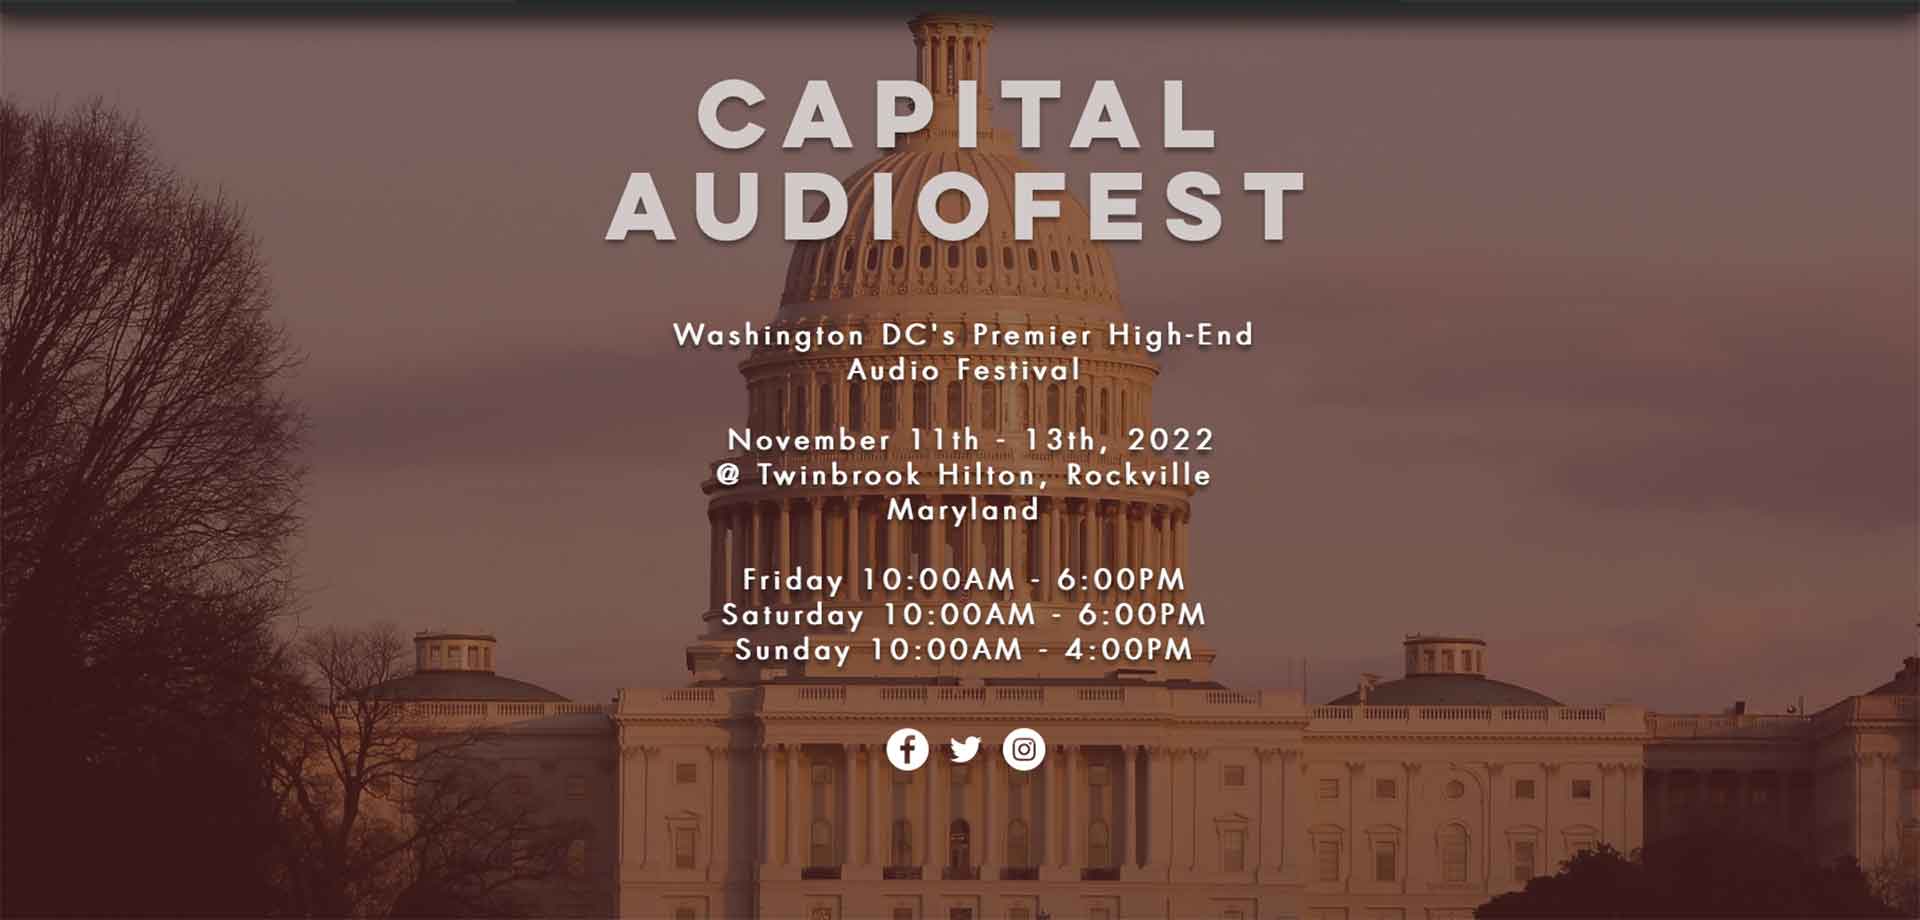 Capital Audiofest Starts On Friday November 11 Tickets and Rooms